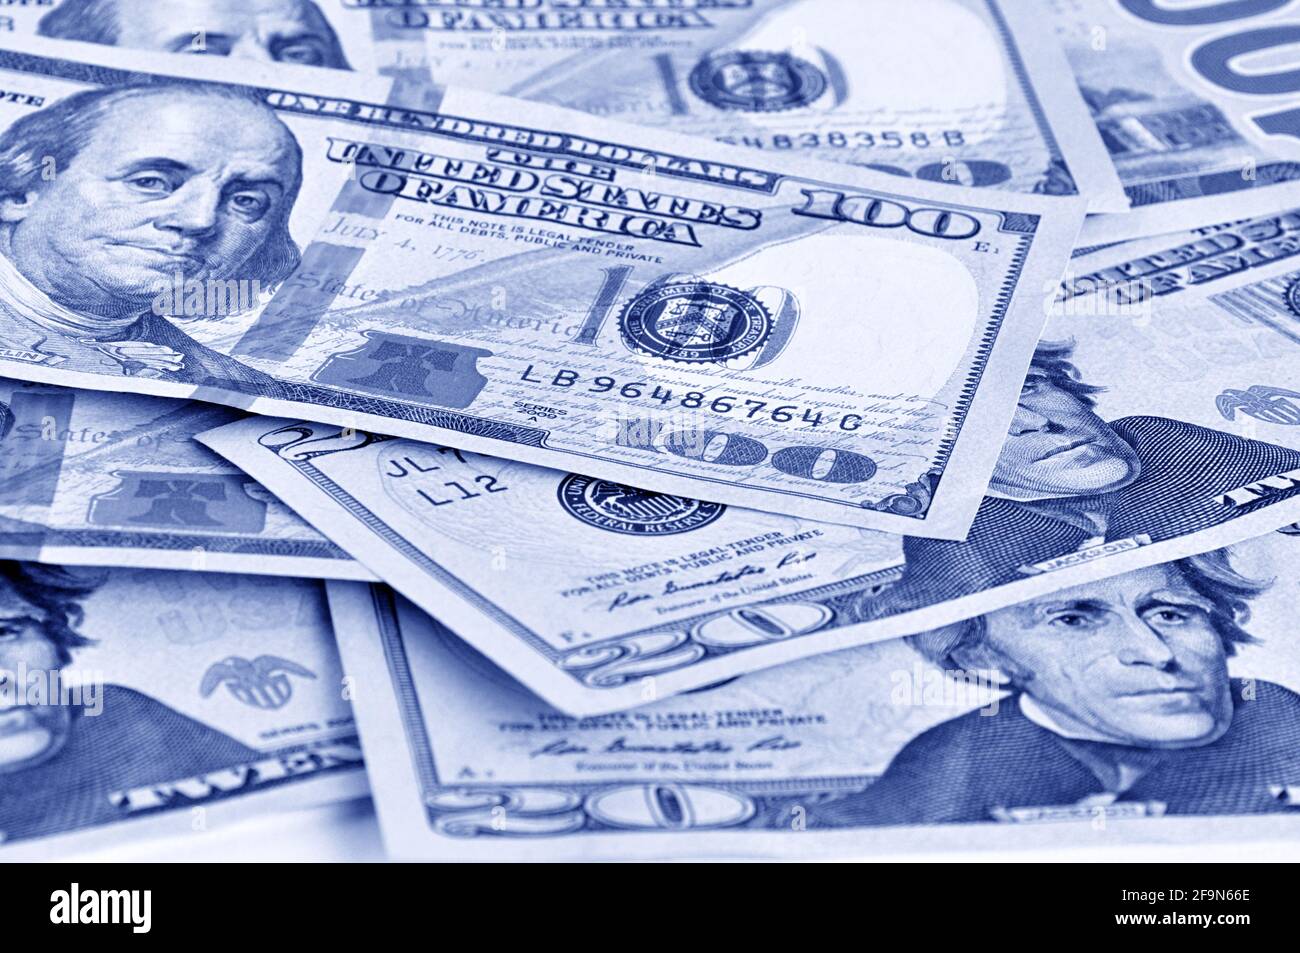 Money - United States dollars (USD) bills in retro blue color effect Stock Photo